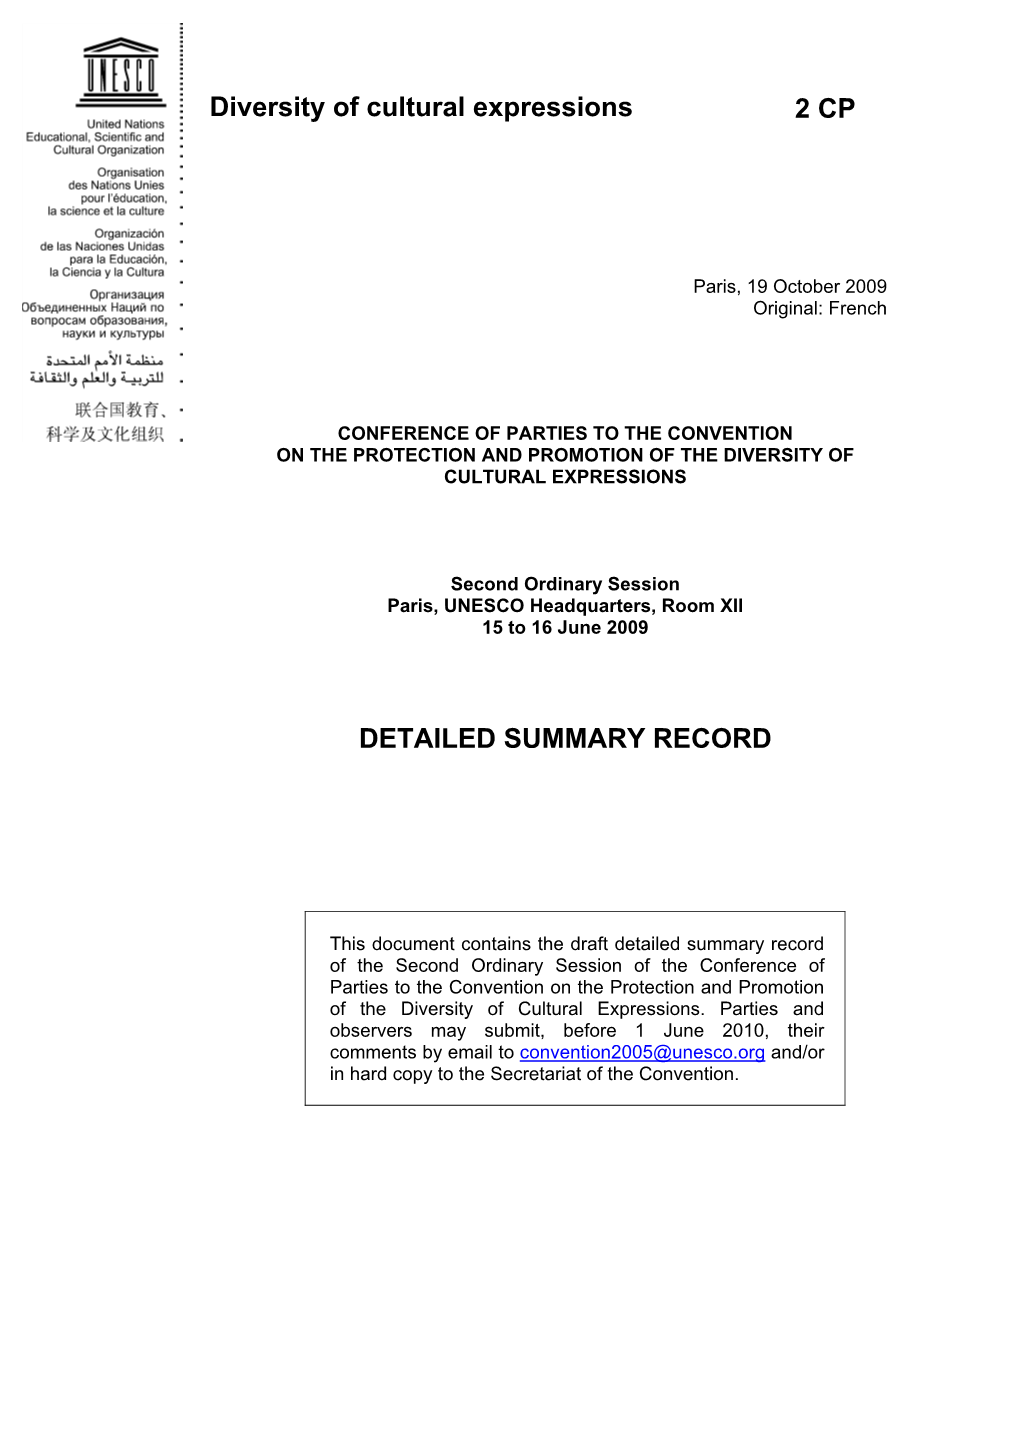 2 CP Diversity of Cultural Expressions DETAILED SUMMARY RECORD